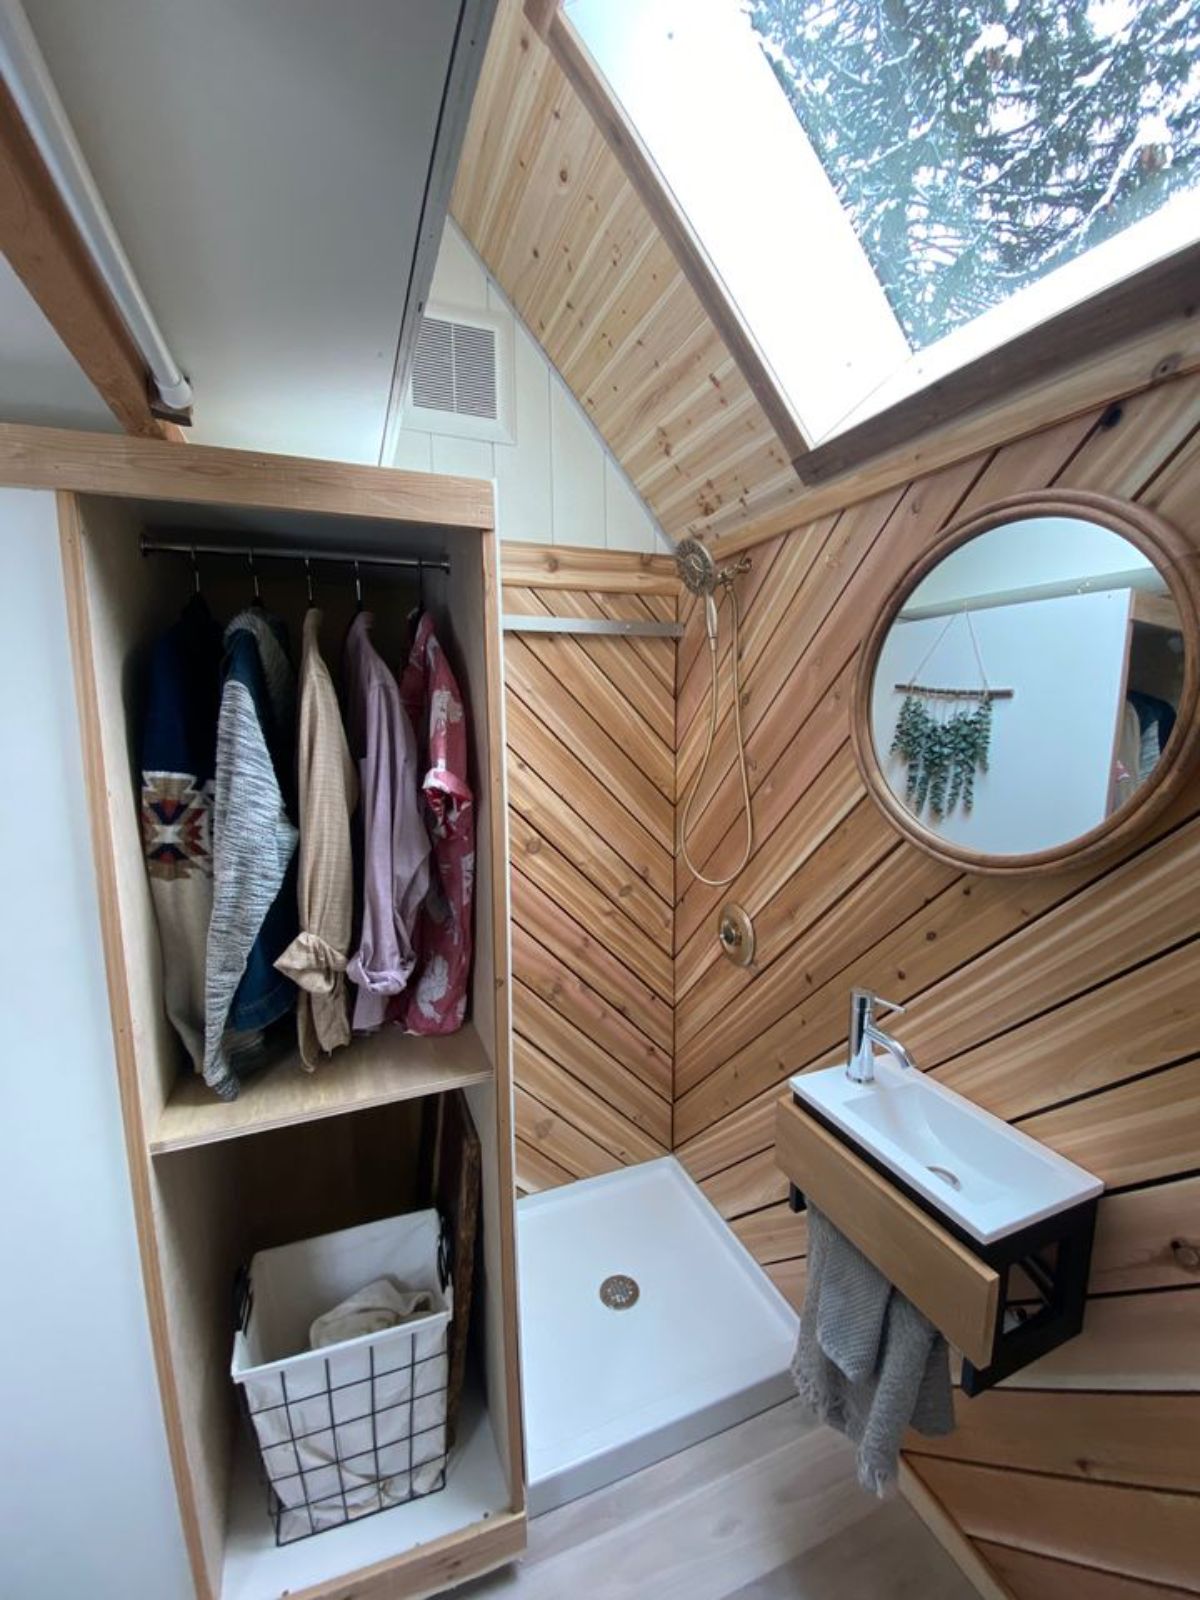 Well designed and stylish bathroom of tiny house